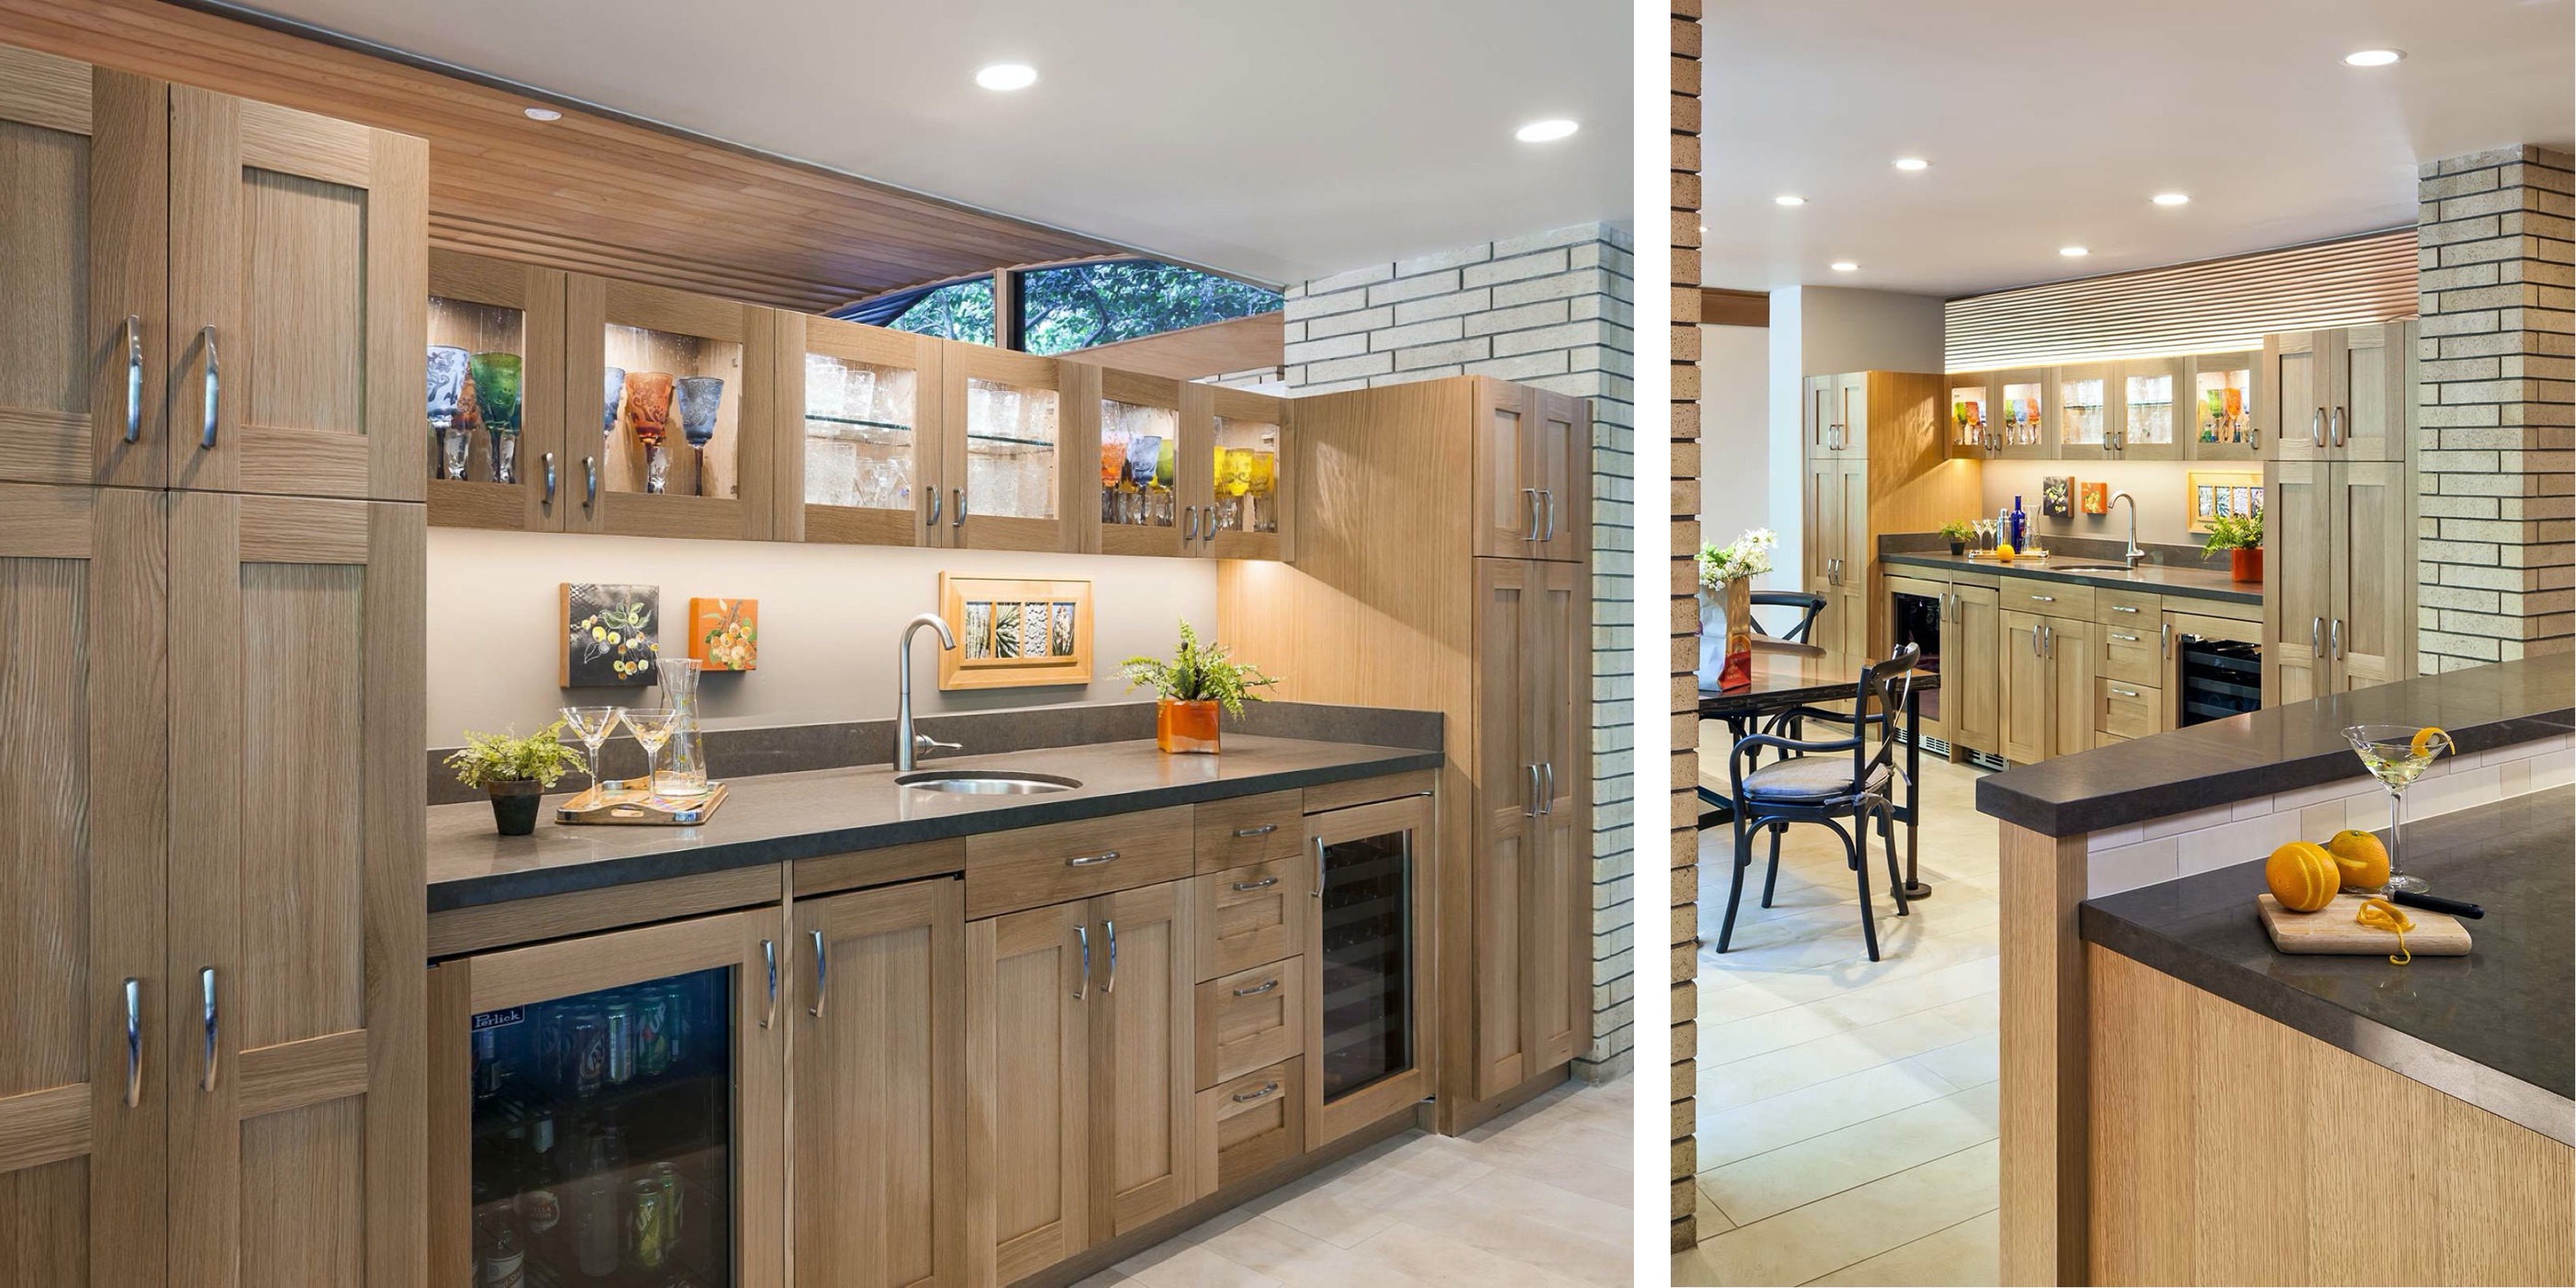 5 Design Elements That Will Revitalize Your Kitchen in the East Bay - Kitchen Renovation - Custom cabinetry - Custom Kitchens